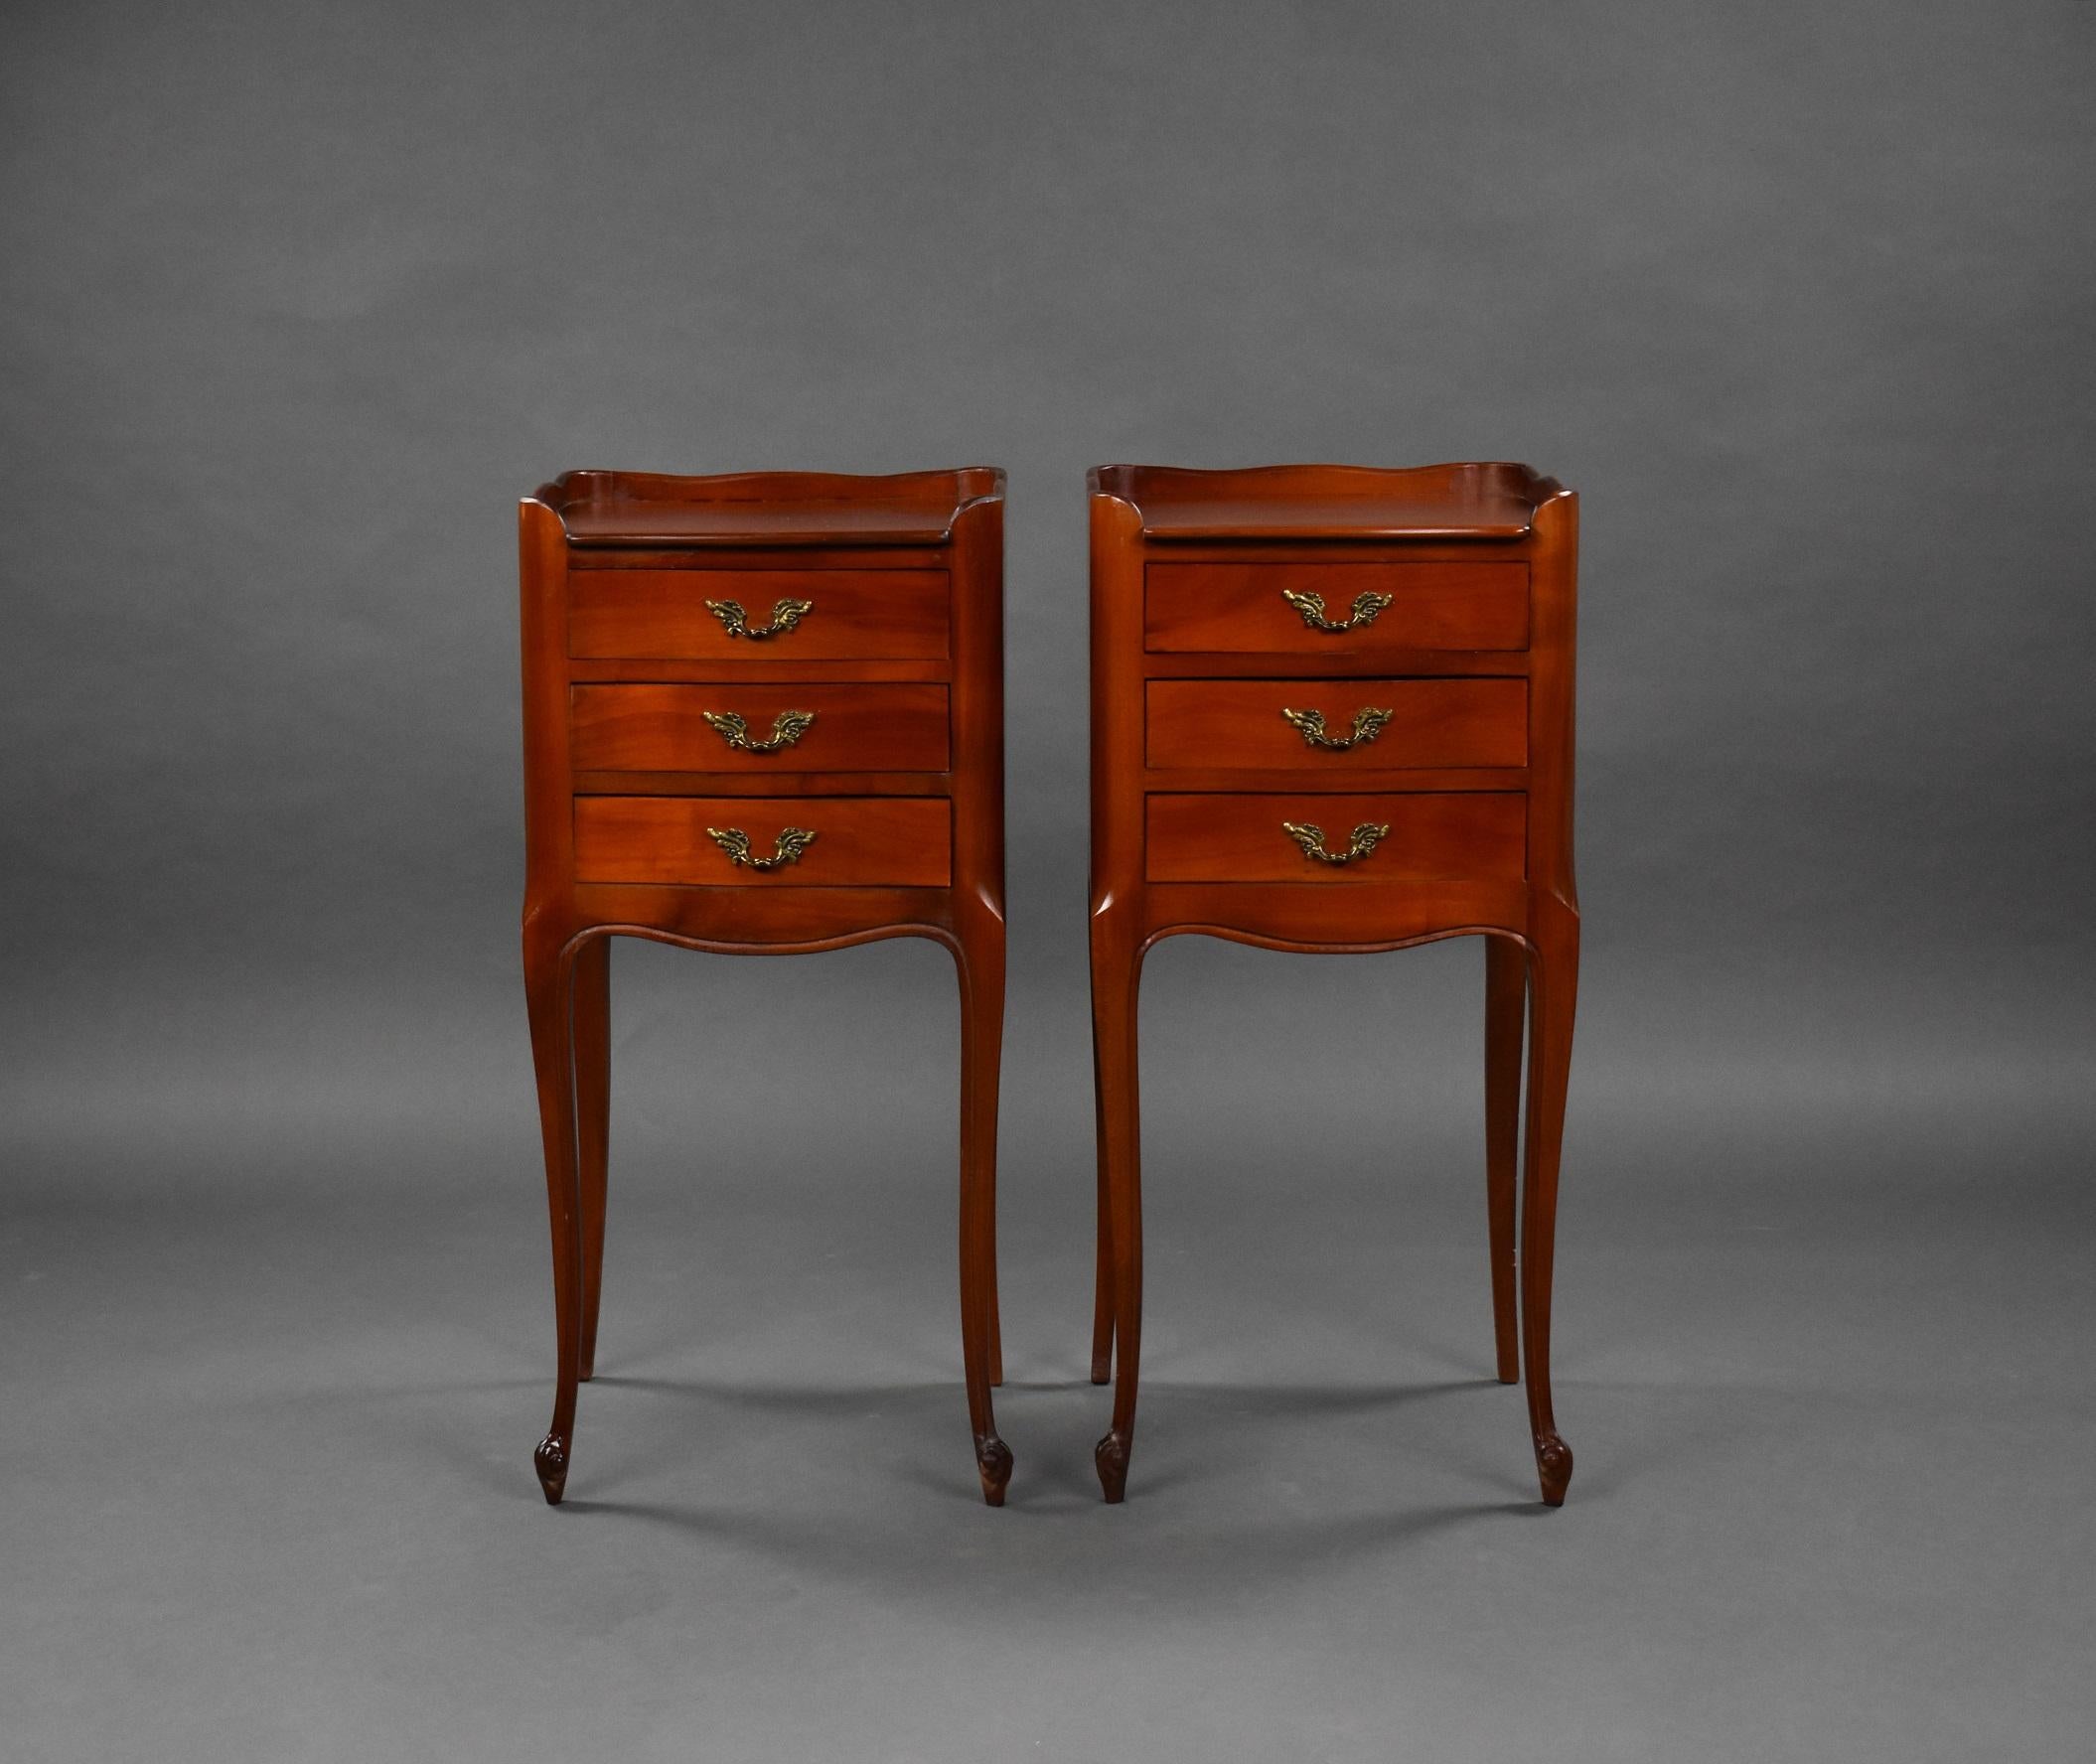 Pair French style walnut bedsides in good condition with three drawers standing on elegant tapered legs.